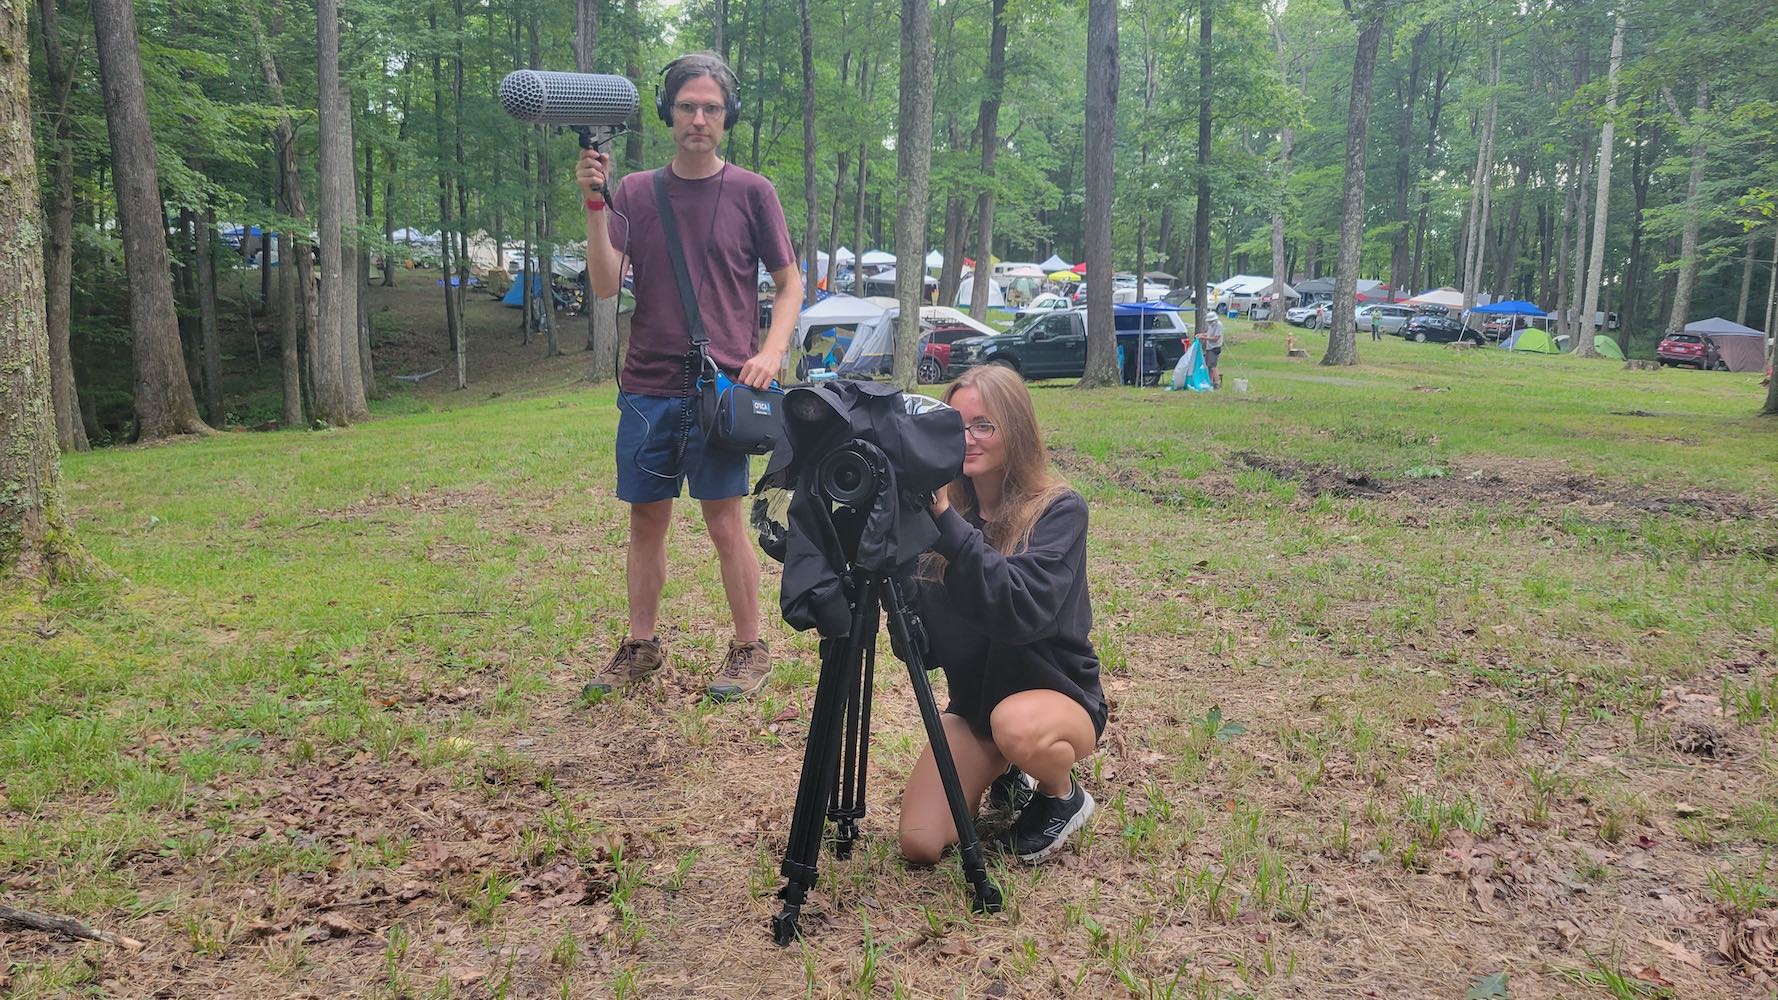 Photo of CASL student Ava Abramowicz getting documentary footage at a music festival in West Virginia